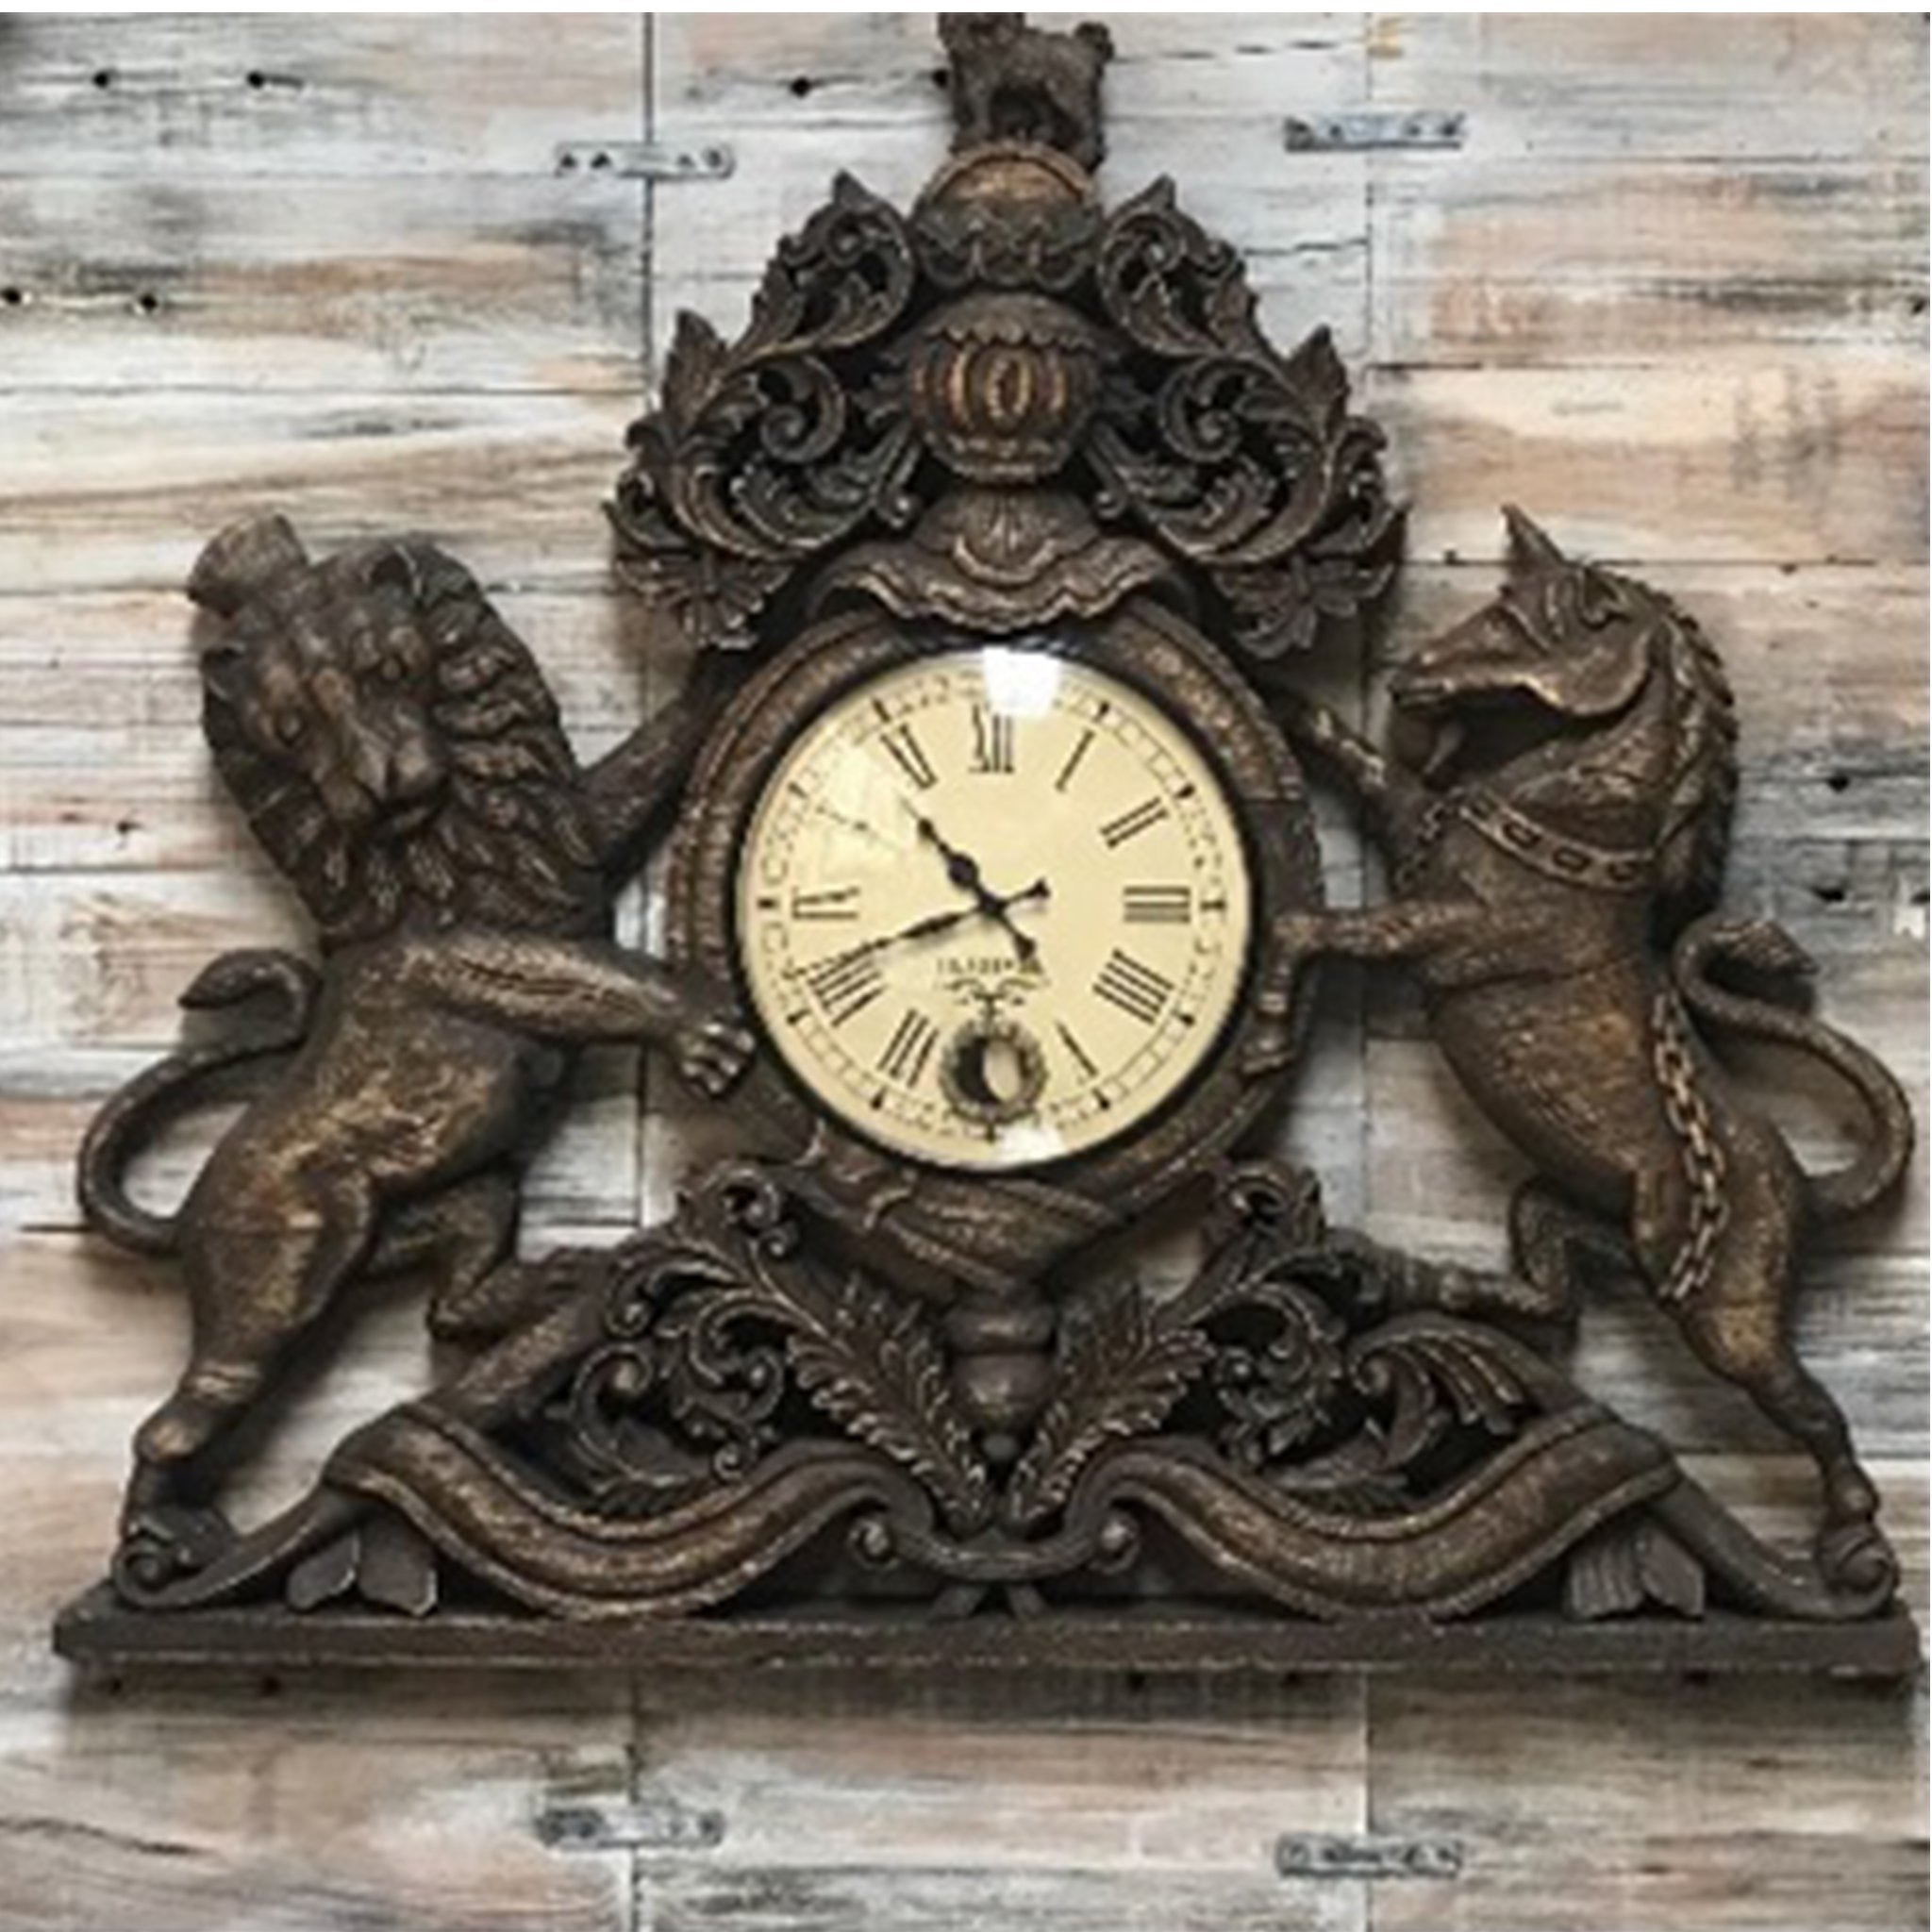 Vintage Hand Carved Wooden 'United Kingdom Royal Coat of Arms' Pendulum Wall Clock